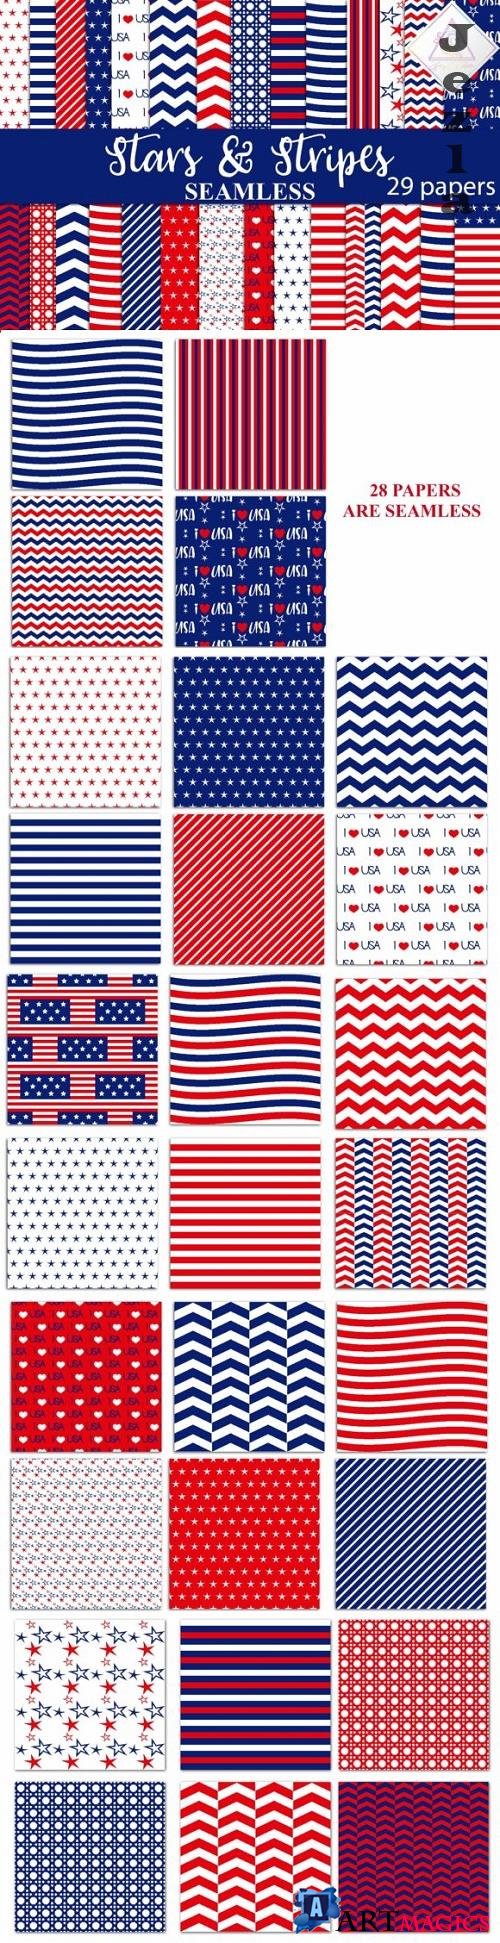 Seamless Stars and Stripes Patterns